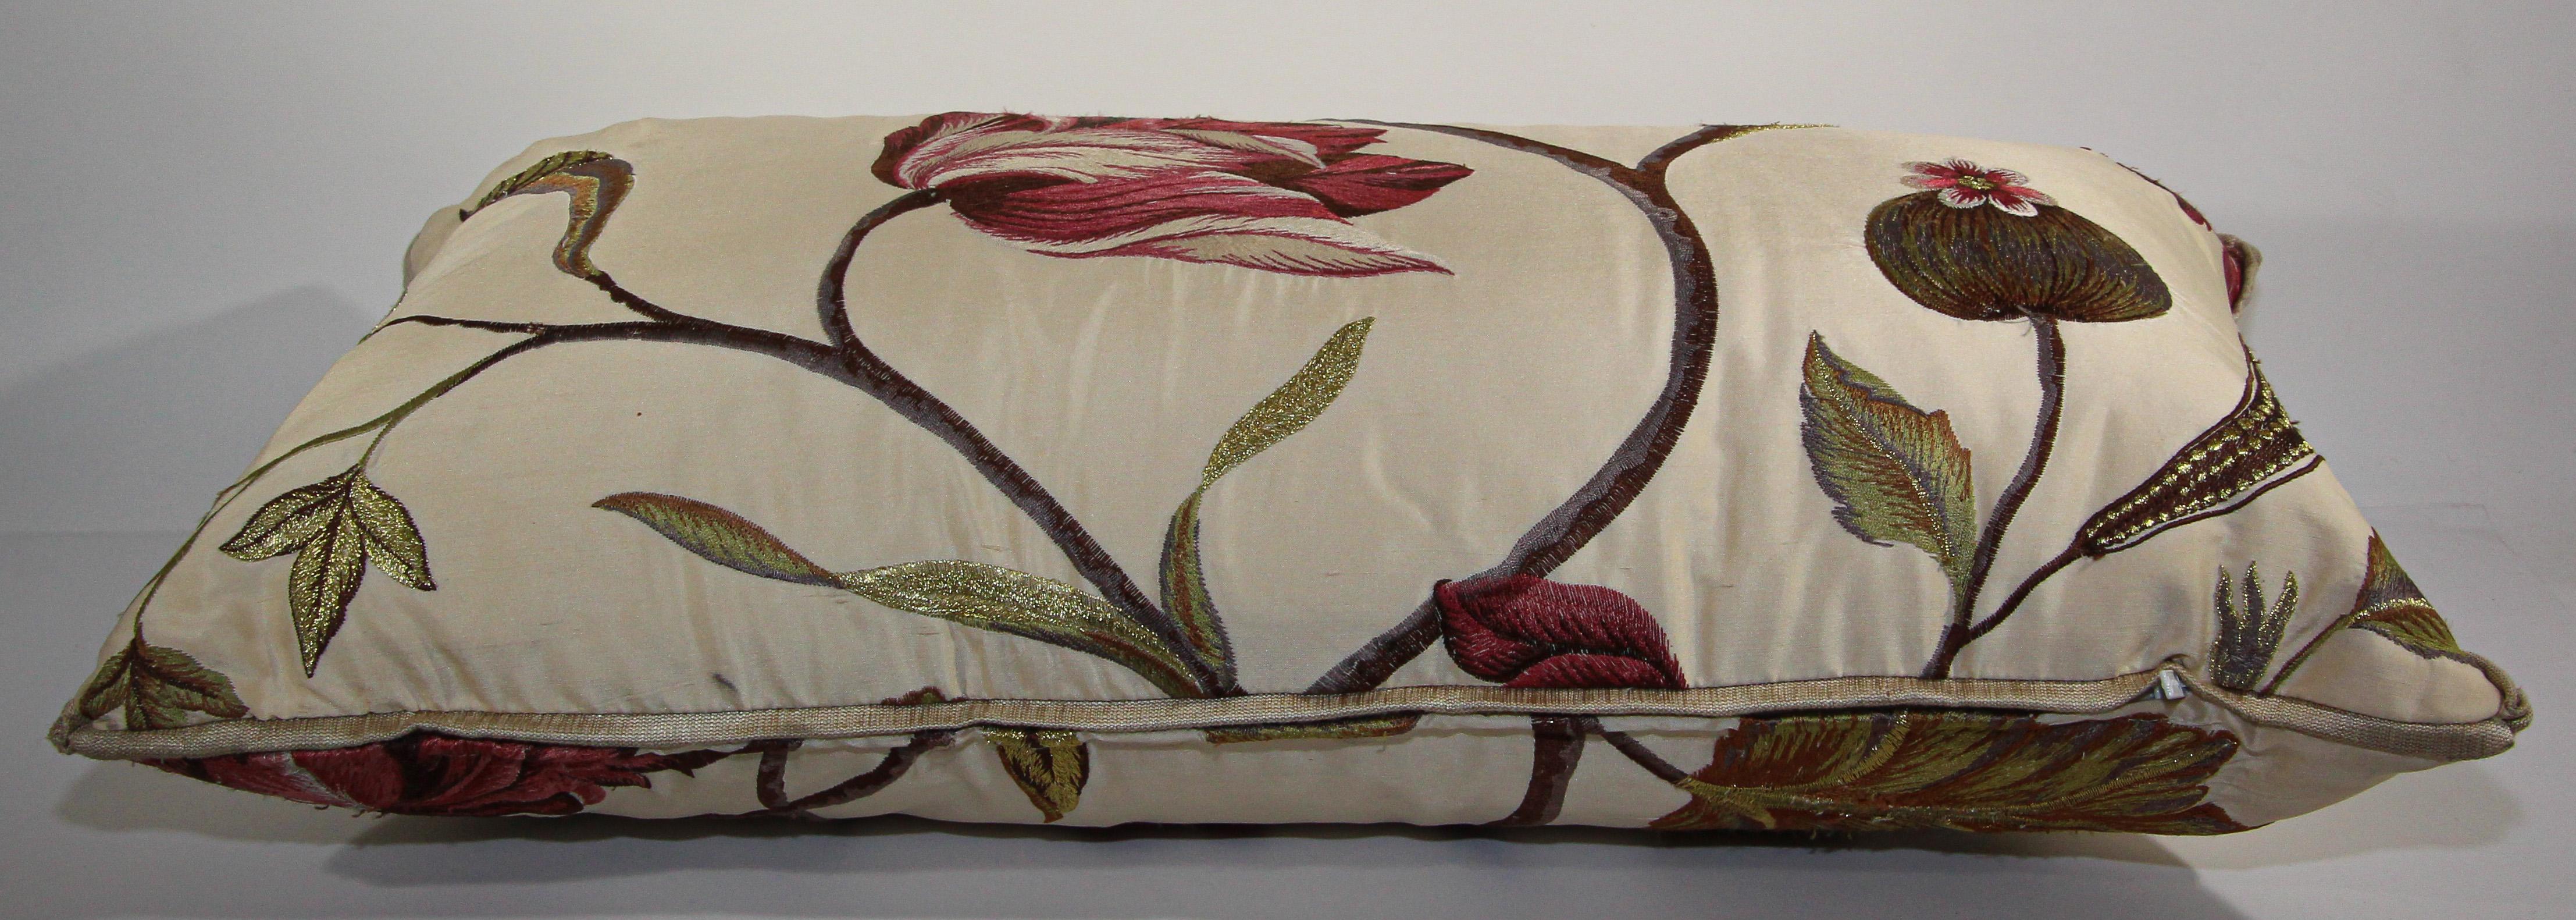 20th Century Vintage Throw Decorative Taffeta Pillow Embroidered with Flowers For Sale